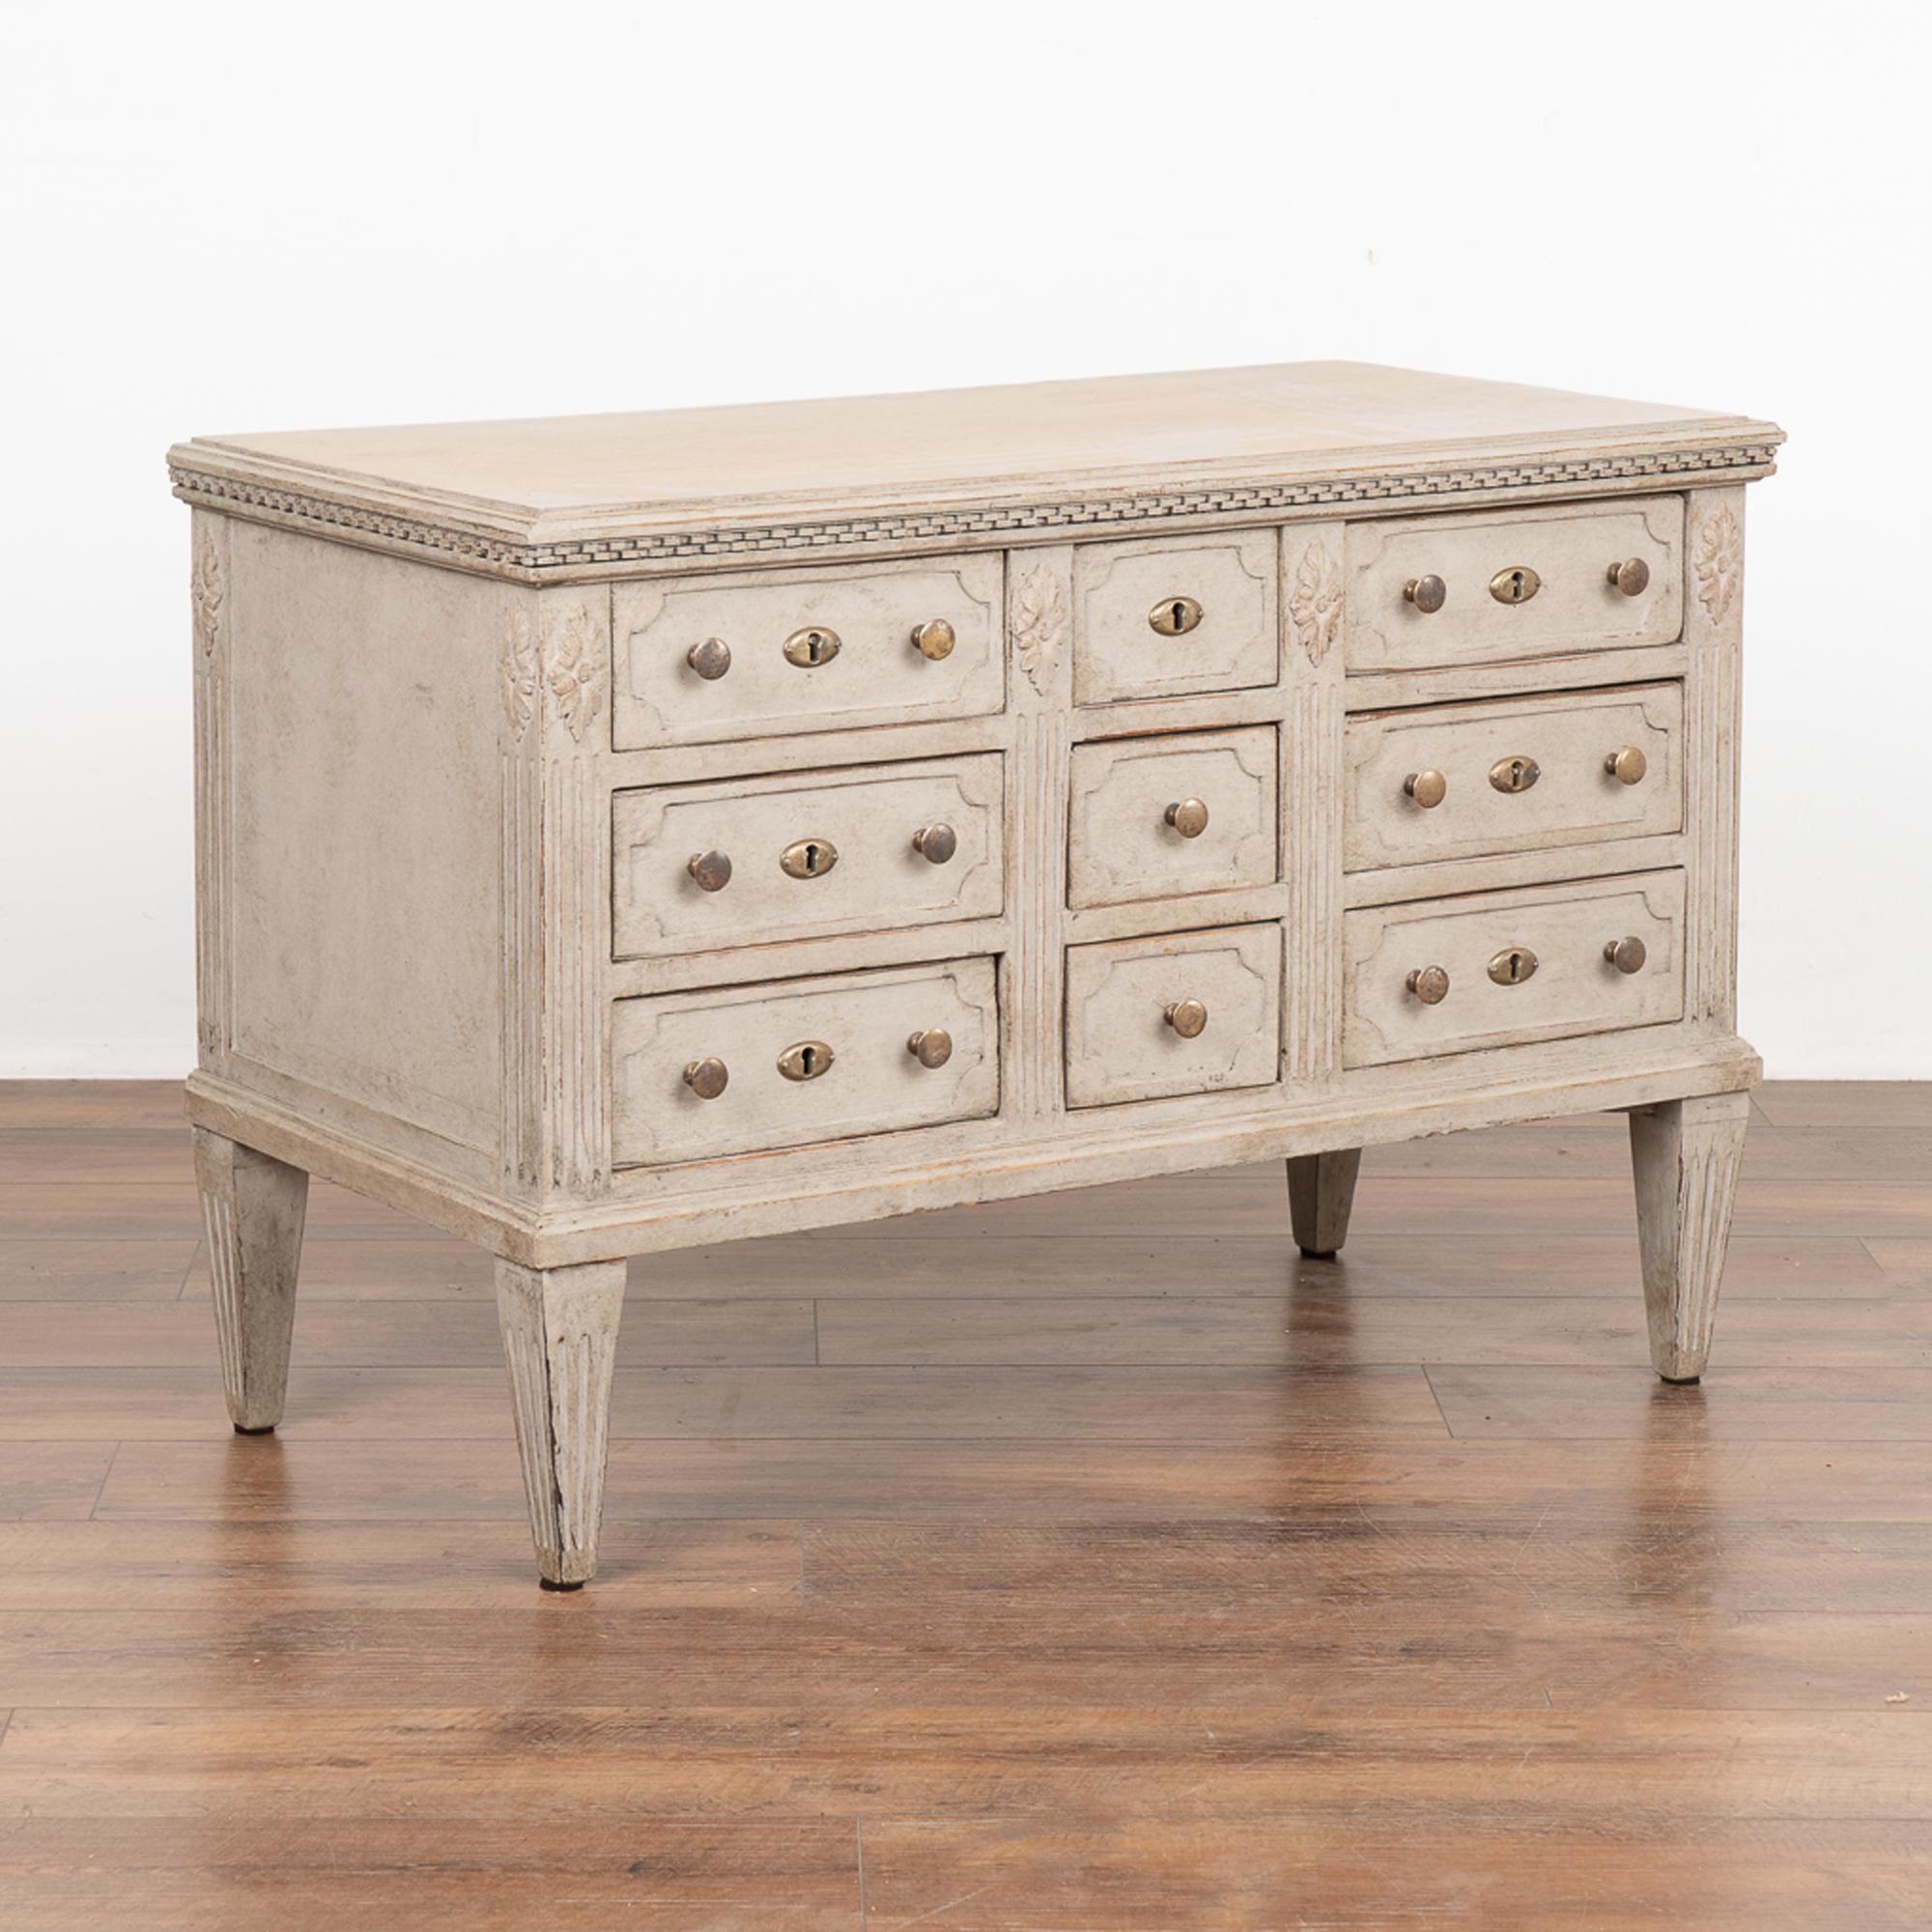 Fascinating Gustavian pine chest of nine drawers with fluted columns, dentil molding and tapered fluted feet.
The unique configuration of drawers with central three in a square shape creates visual intrigue.
The newer, professionally applied layered